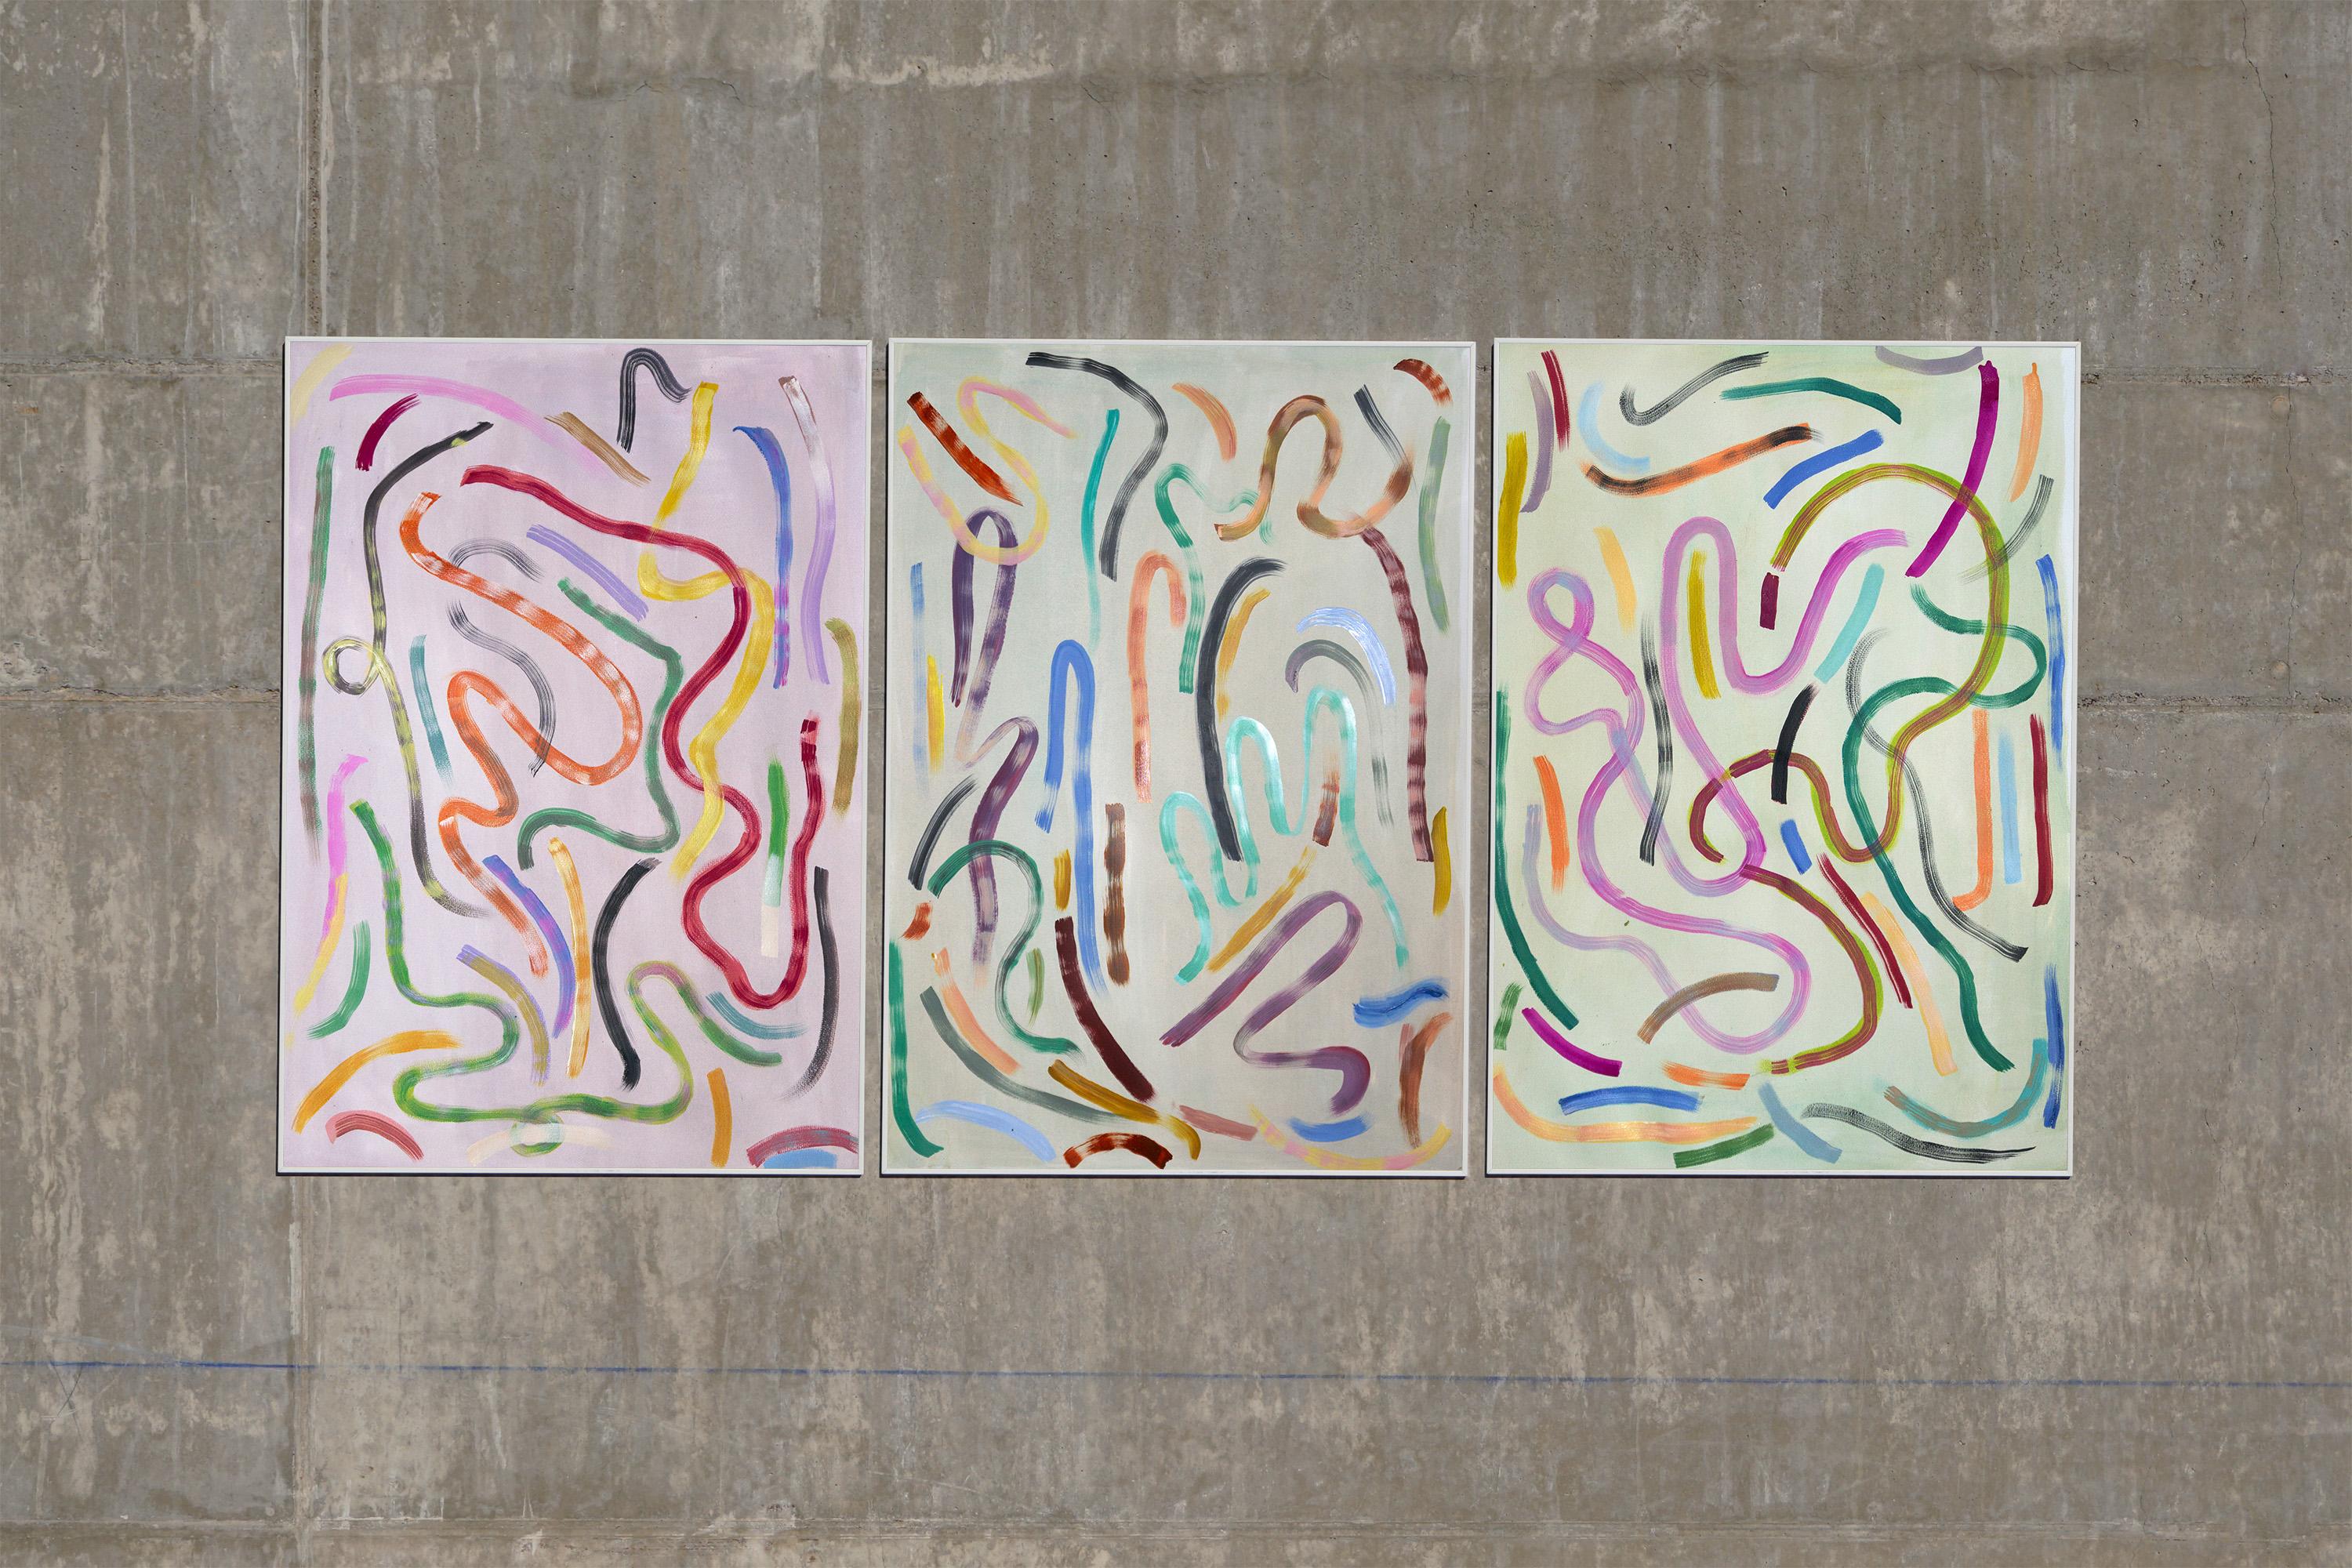 Pastel Ribbon, Miami Pastel Tones Painting on Paper, Color Abstract Brushstrokes 3